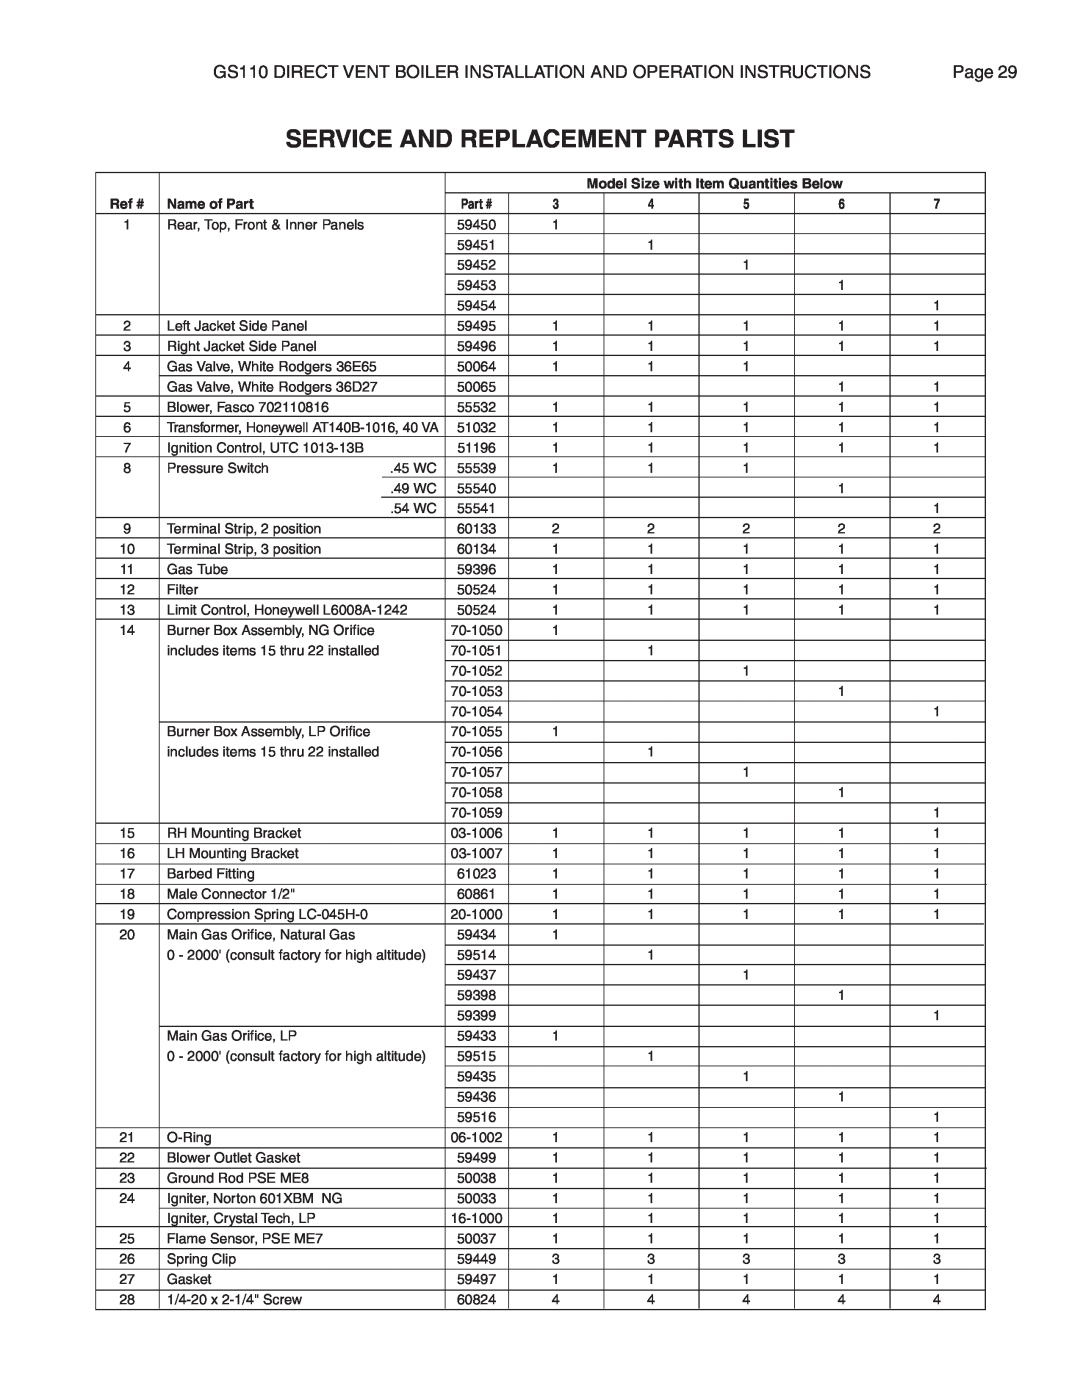 Smith Cast Iron Boilers GS110W Service And Replacement Parts List, Model Size with Item Quantities Below, Ref # 